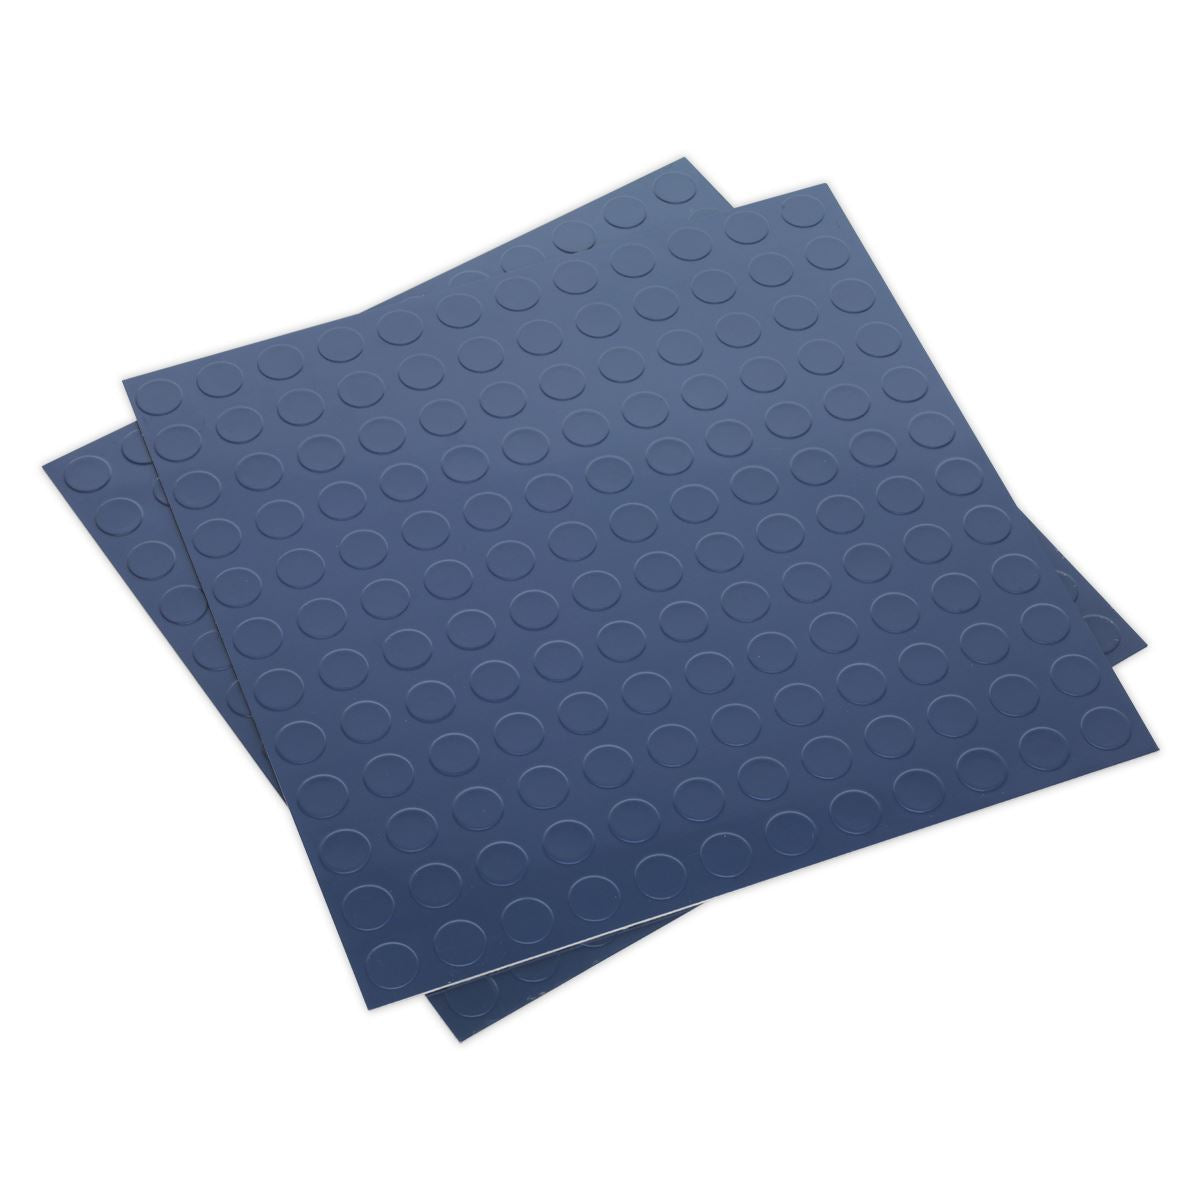 Sealey Vinyl Floor Tile with Peel & Stick Backing - Blue Coin Pack of 16